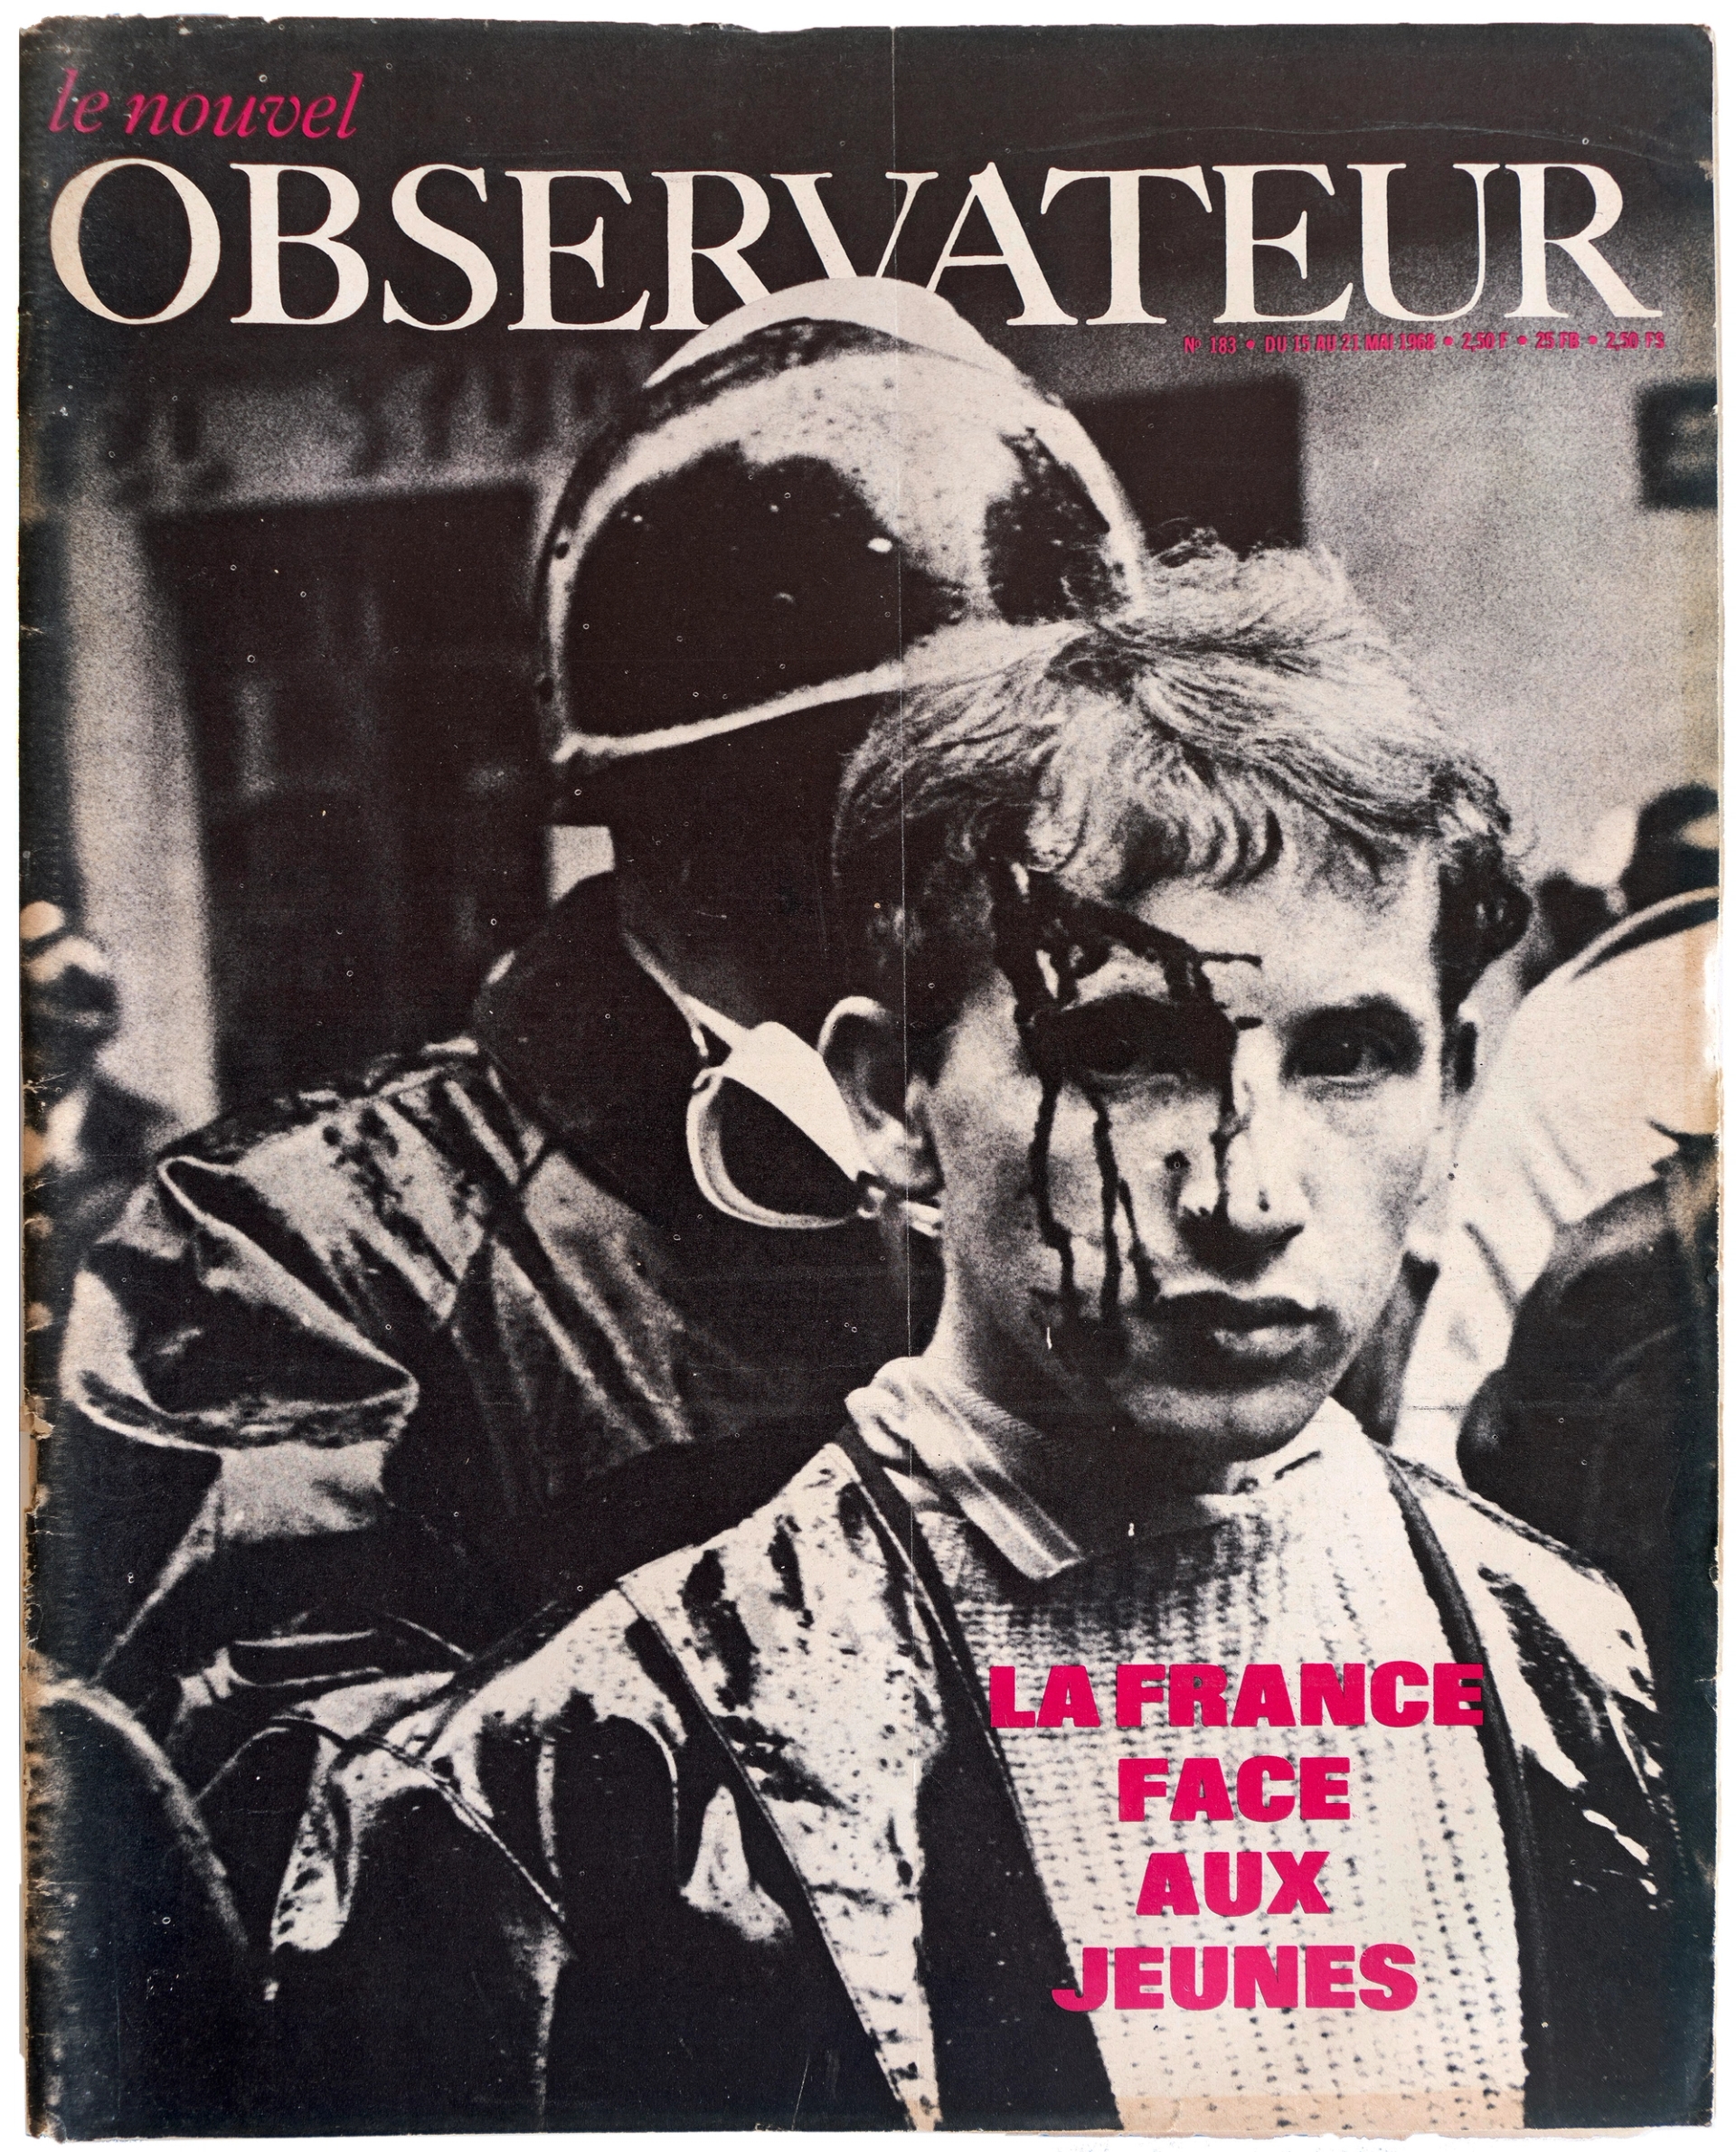 The three distinct deictic image acts give a characteristically different account of the subject: The mediatized point of view portrays the protagonist of the barricade in terms of human interest. In a deictic act dominated by a moralizing and psychologizing narrative, the suffering individual is made present. 

Magazine cover, Le nouvel Observateur, Paris May 1968.